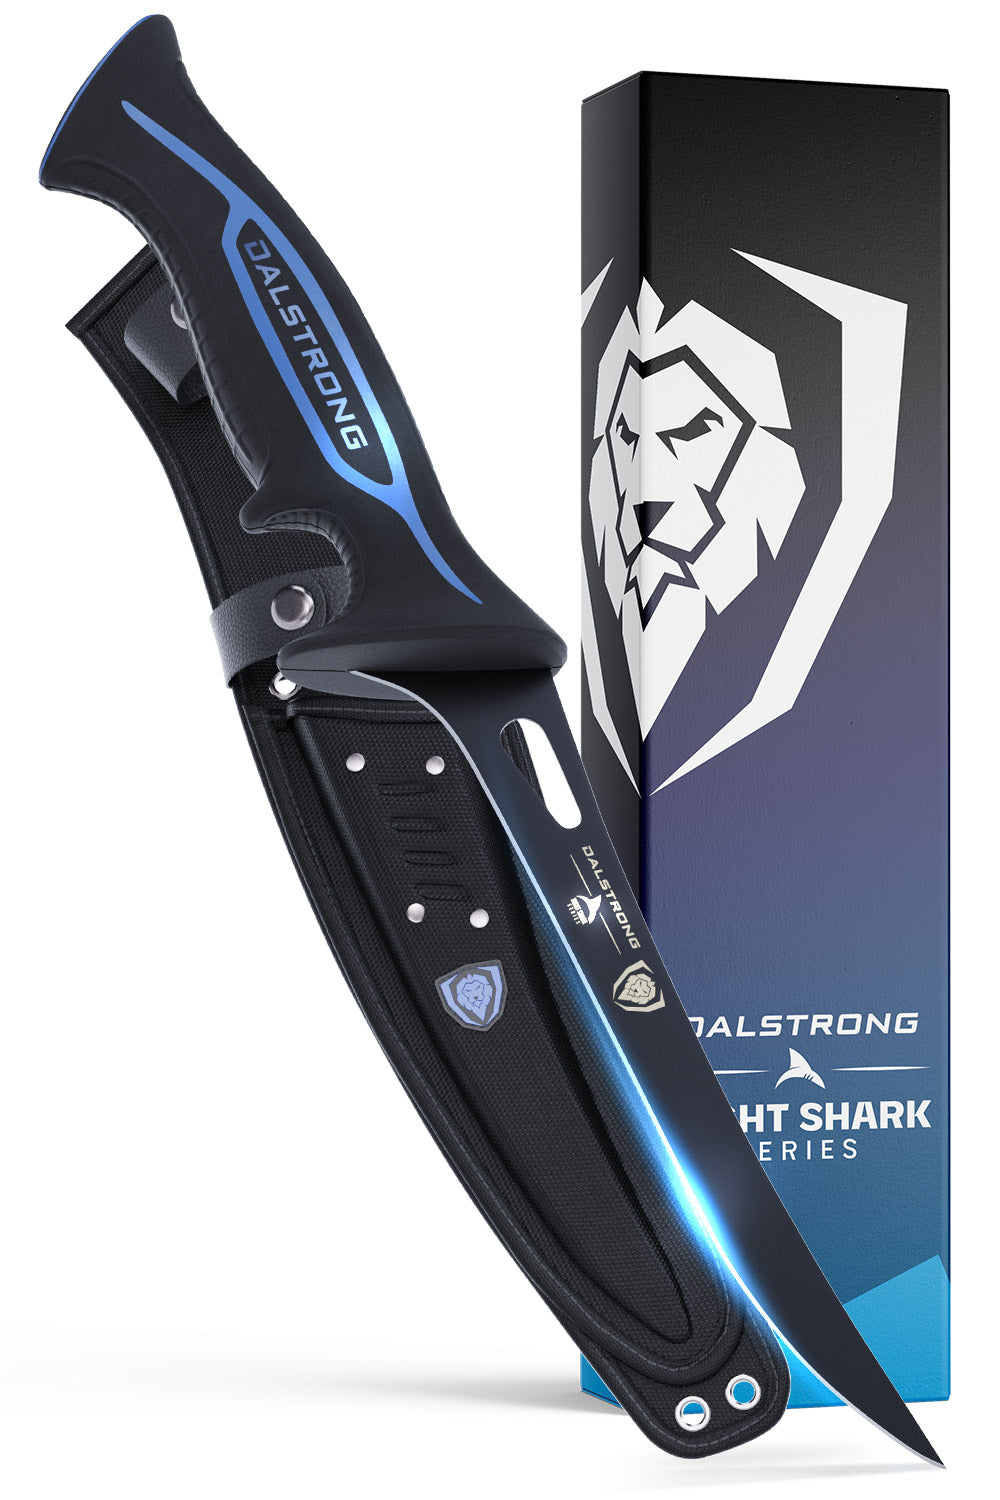 Flexible Fillet Knife 7 | Gladiator Series | NSF Certified | Dalstrong ©